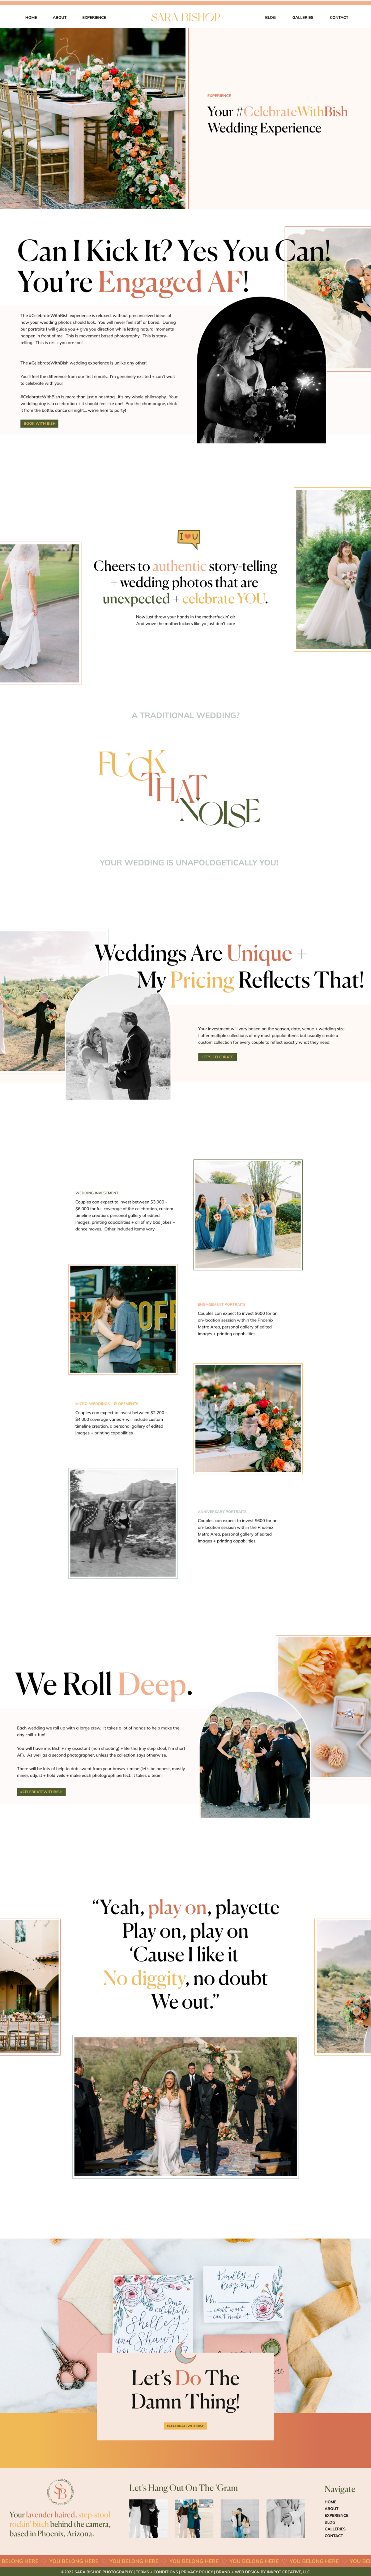 screenshot of full wedding experience page